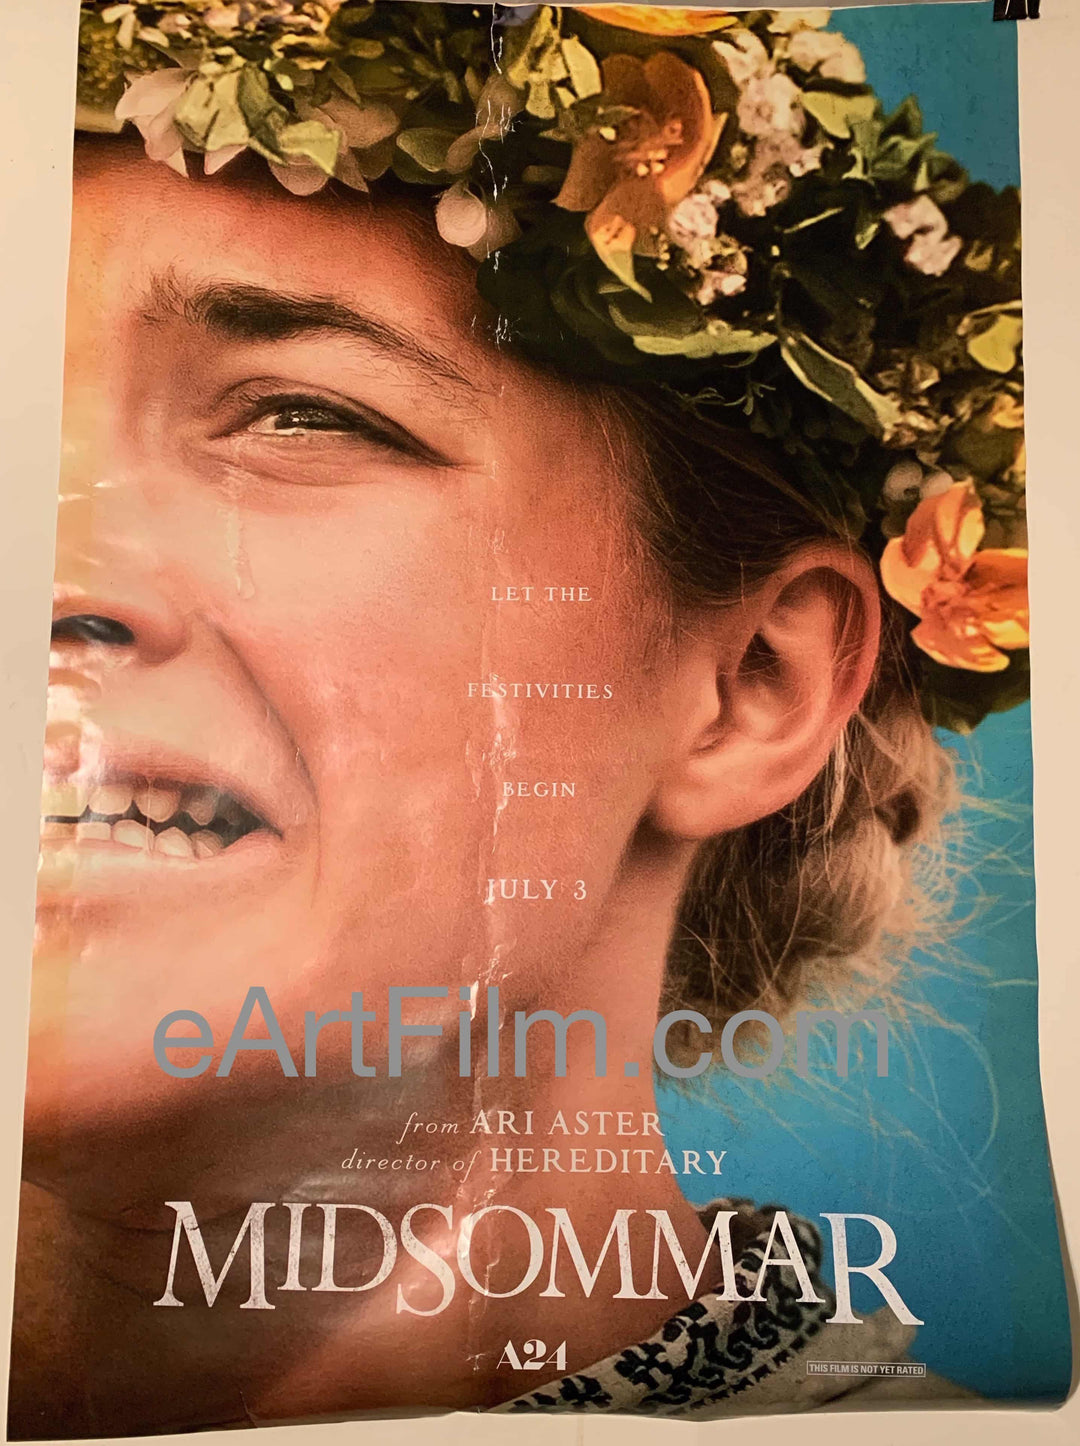 eArtFilm.com U.S One Sheet (27"x40") Advance Midsommar rolled original double sided 27"x40" poster 2019 pagan cult horror